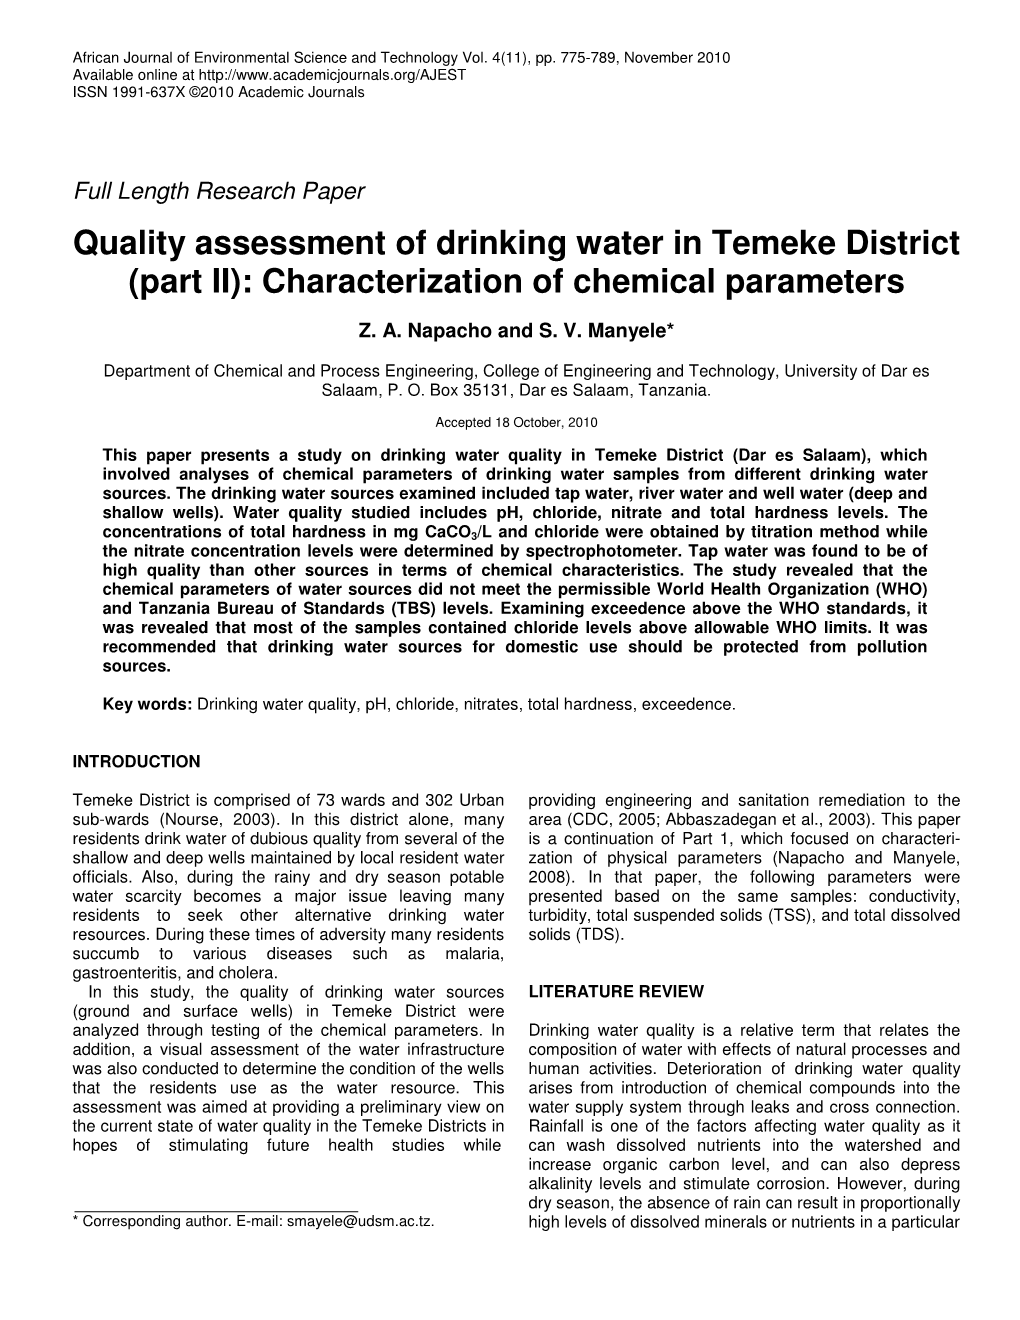 Quality Assessment of Drinking Water in Temeke District (Part II): Characterization of Chemical Parameters